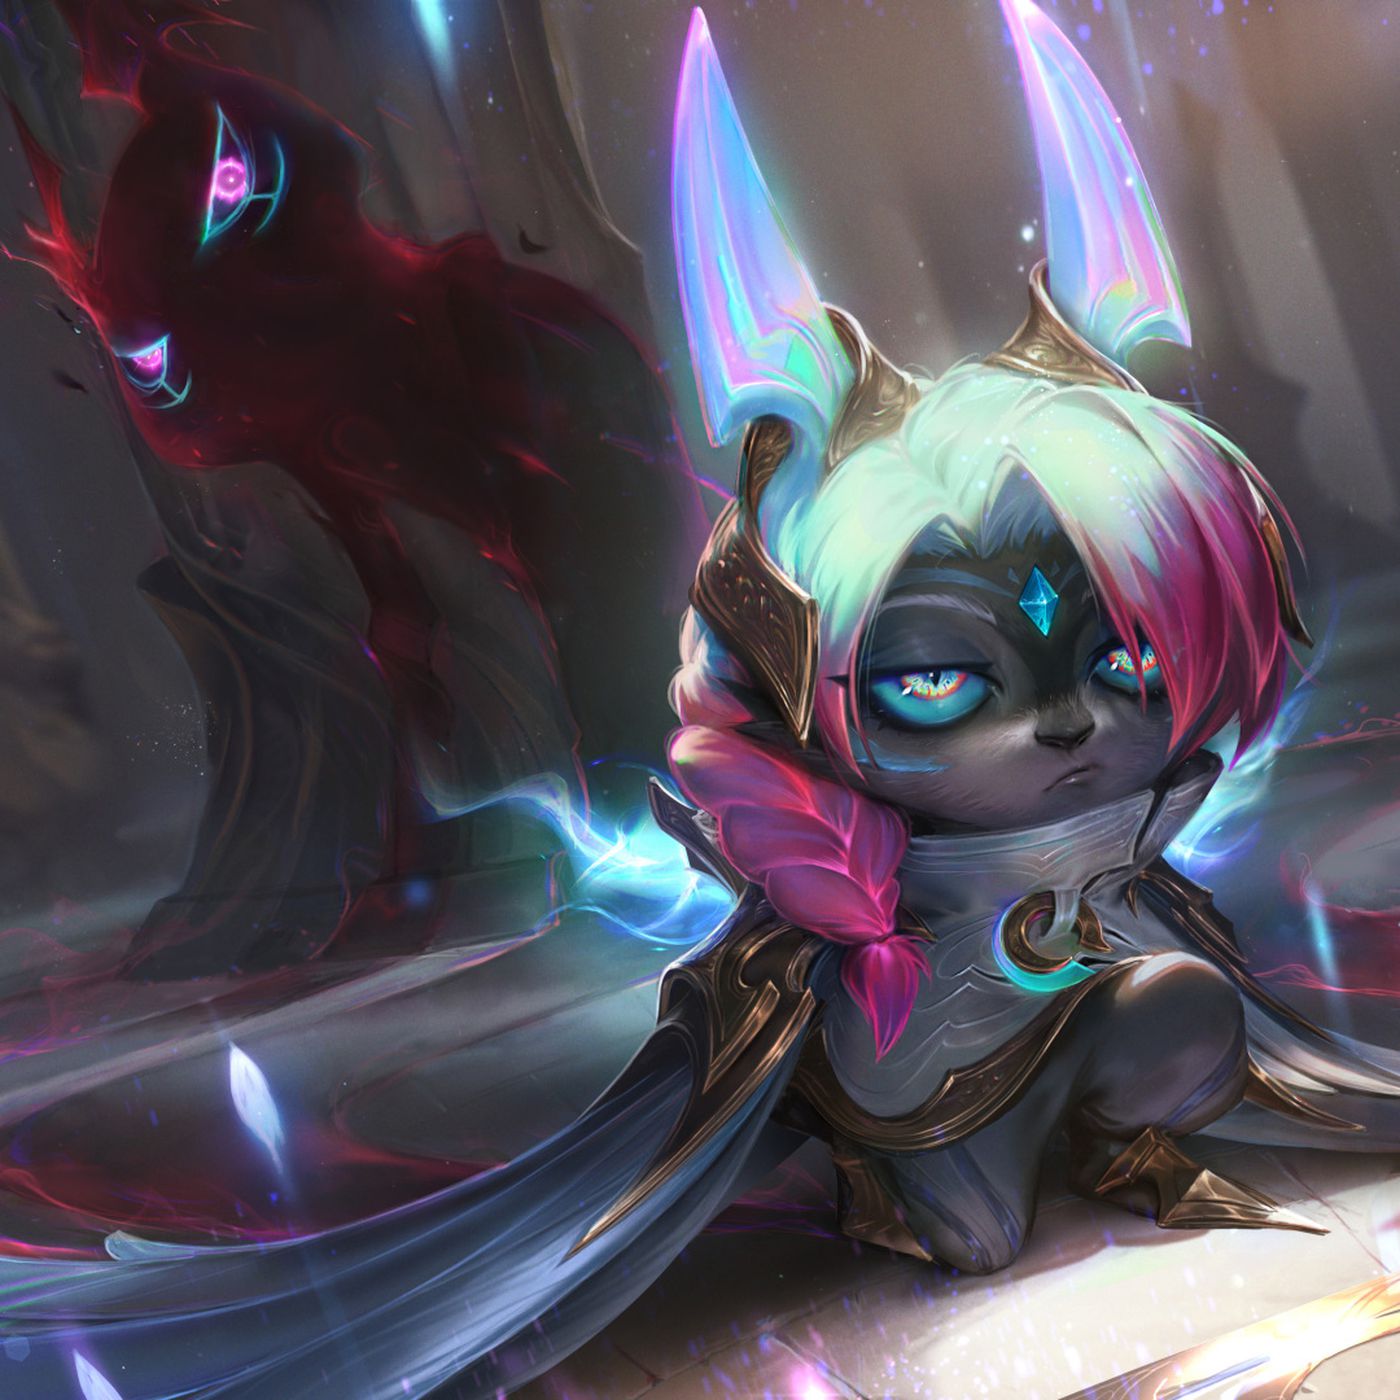 60+ Vex (League of Legends) HD Wallpapers and Backgrounds